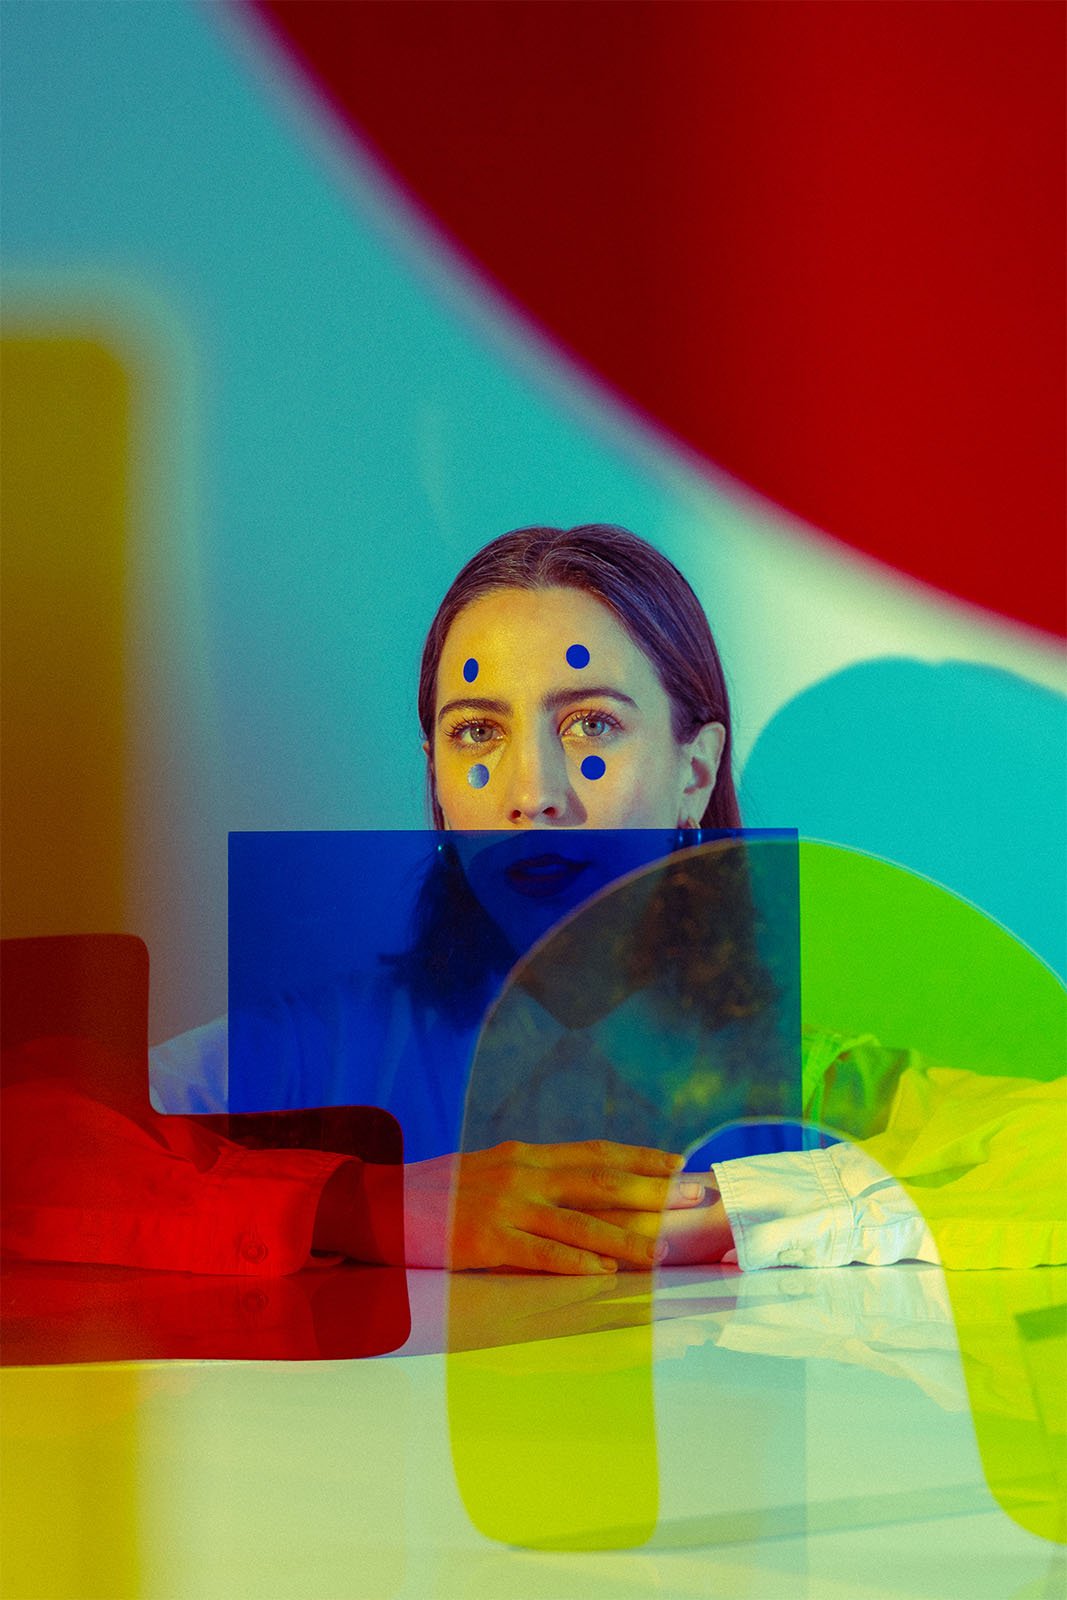 A person with blue dots on their face gazes directly at the camera. They are seated behind a colorful transparent geometric structure, including red, blue, yellow, and green shapes, creating a layered and artistic effect. The background appears gradient.